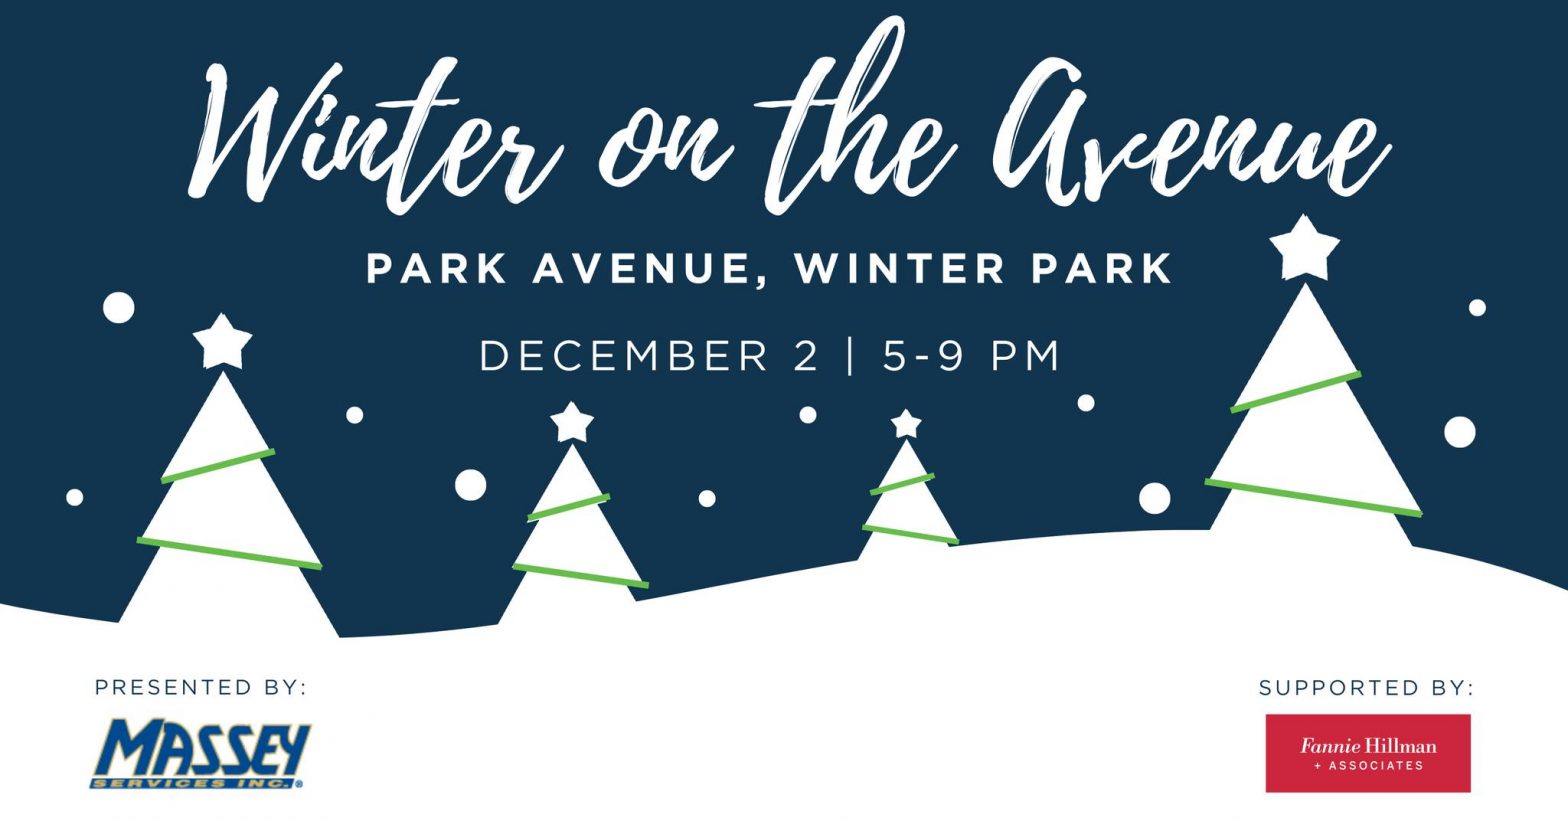 Winter on the Avenue Presented By Massey Services | Park Ave Magazine